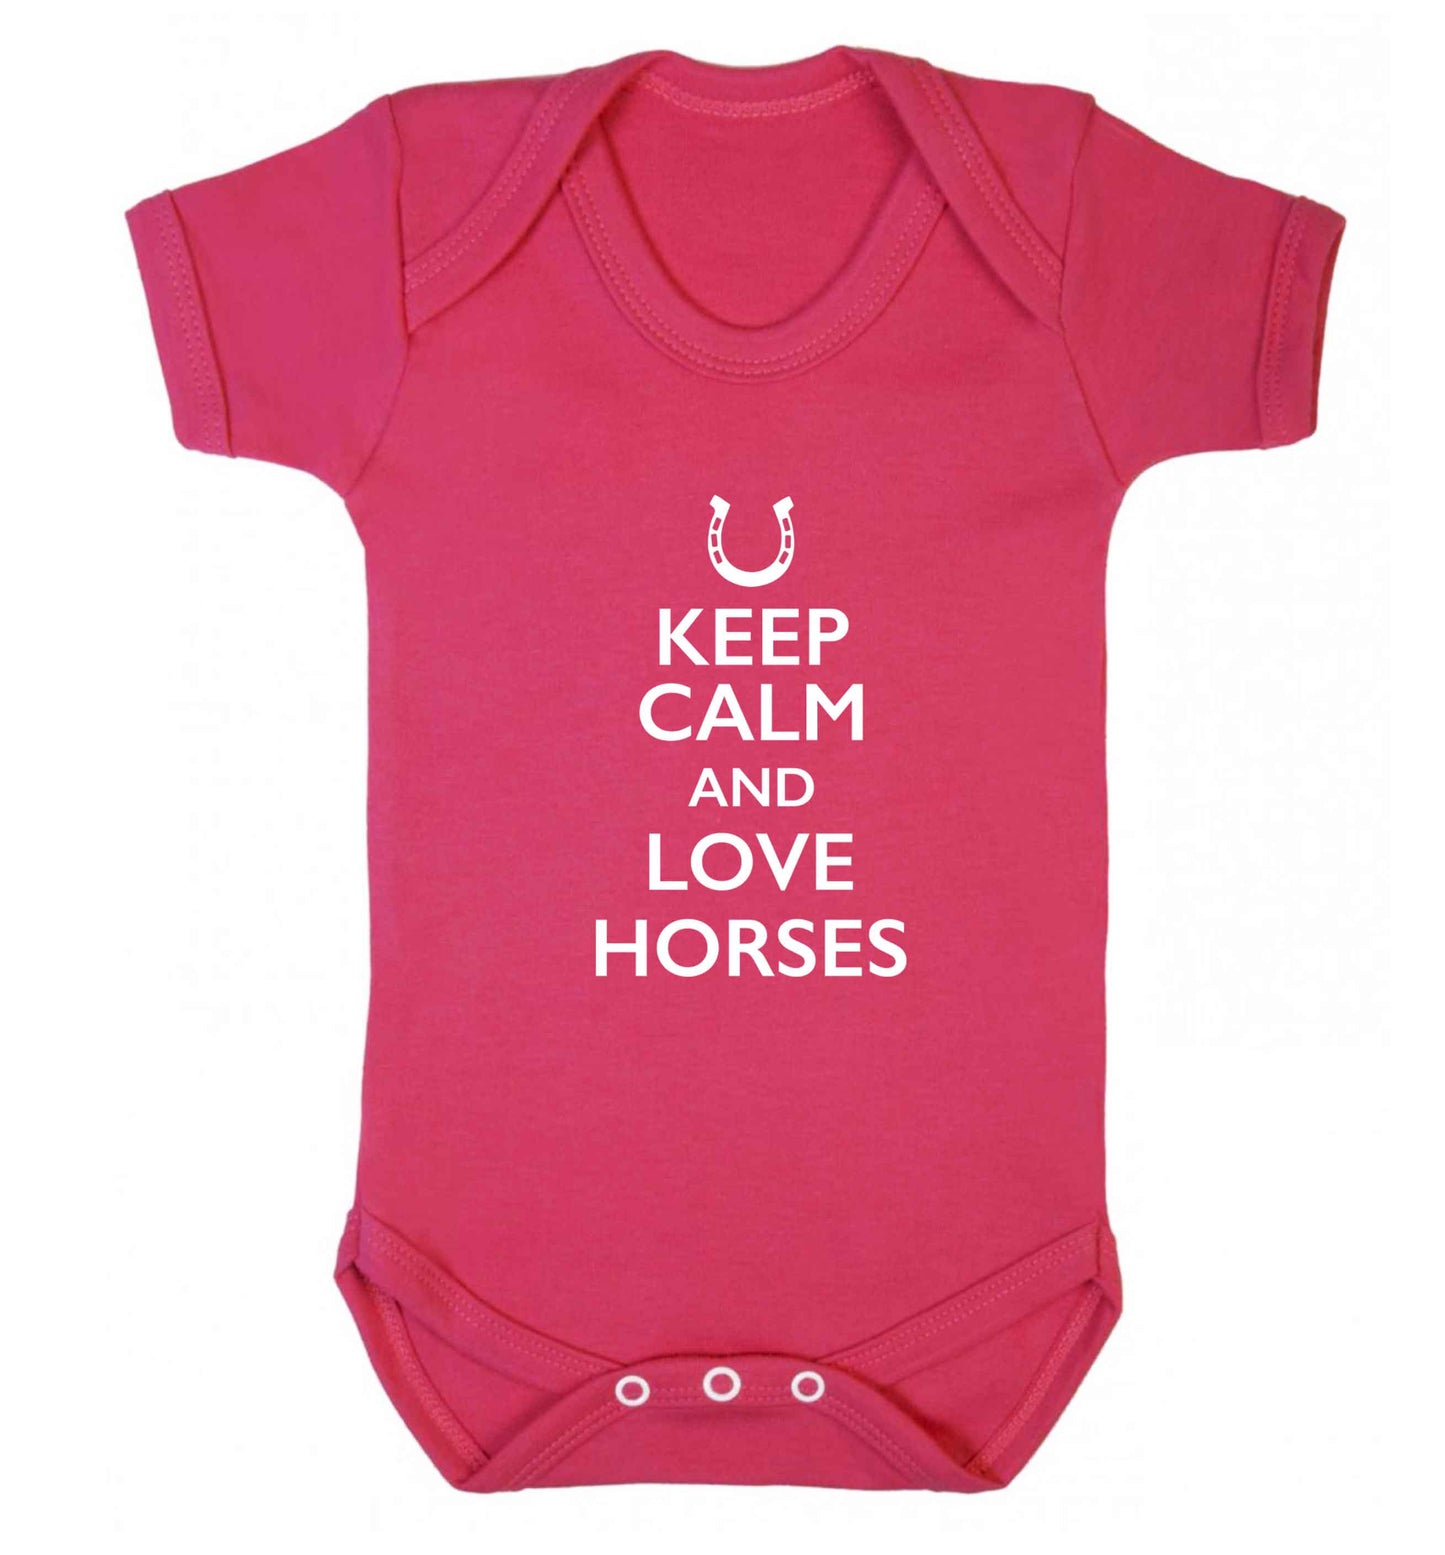 Keep calm and love horses baby vest dark pink 18-24 months